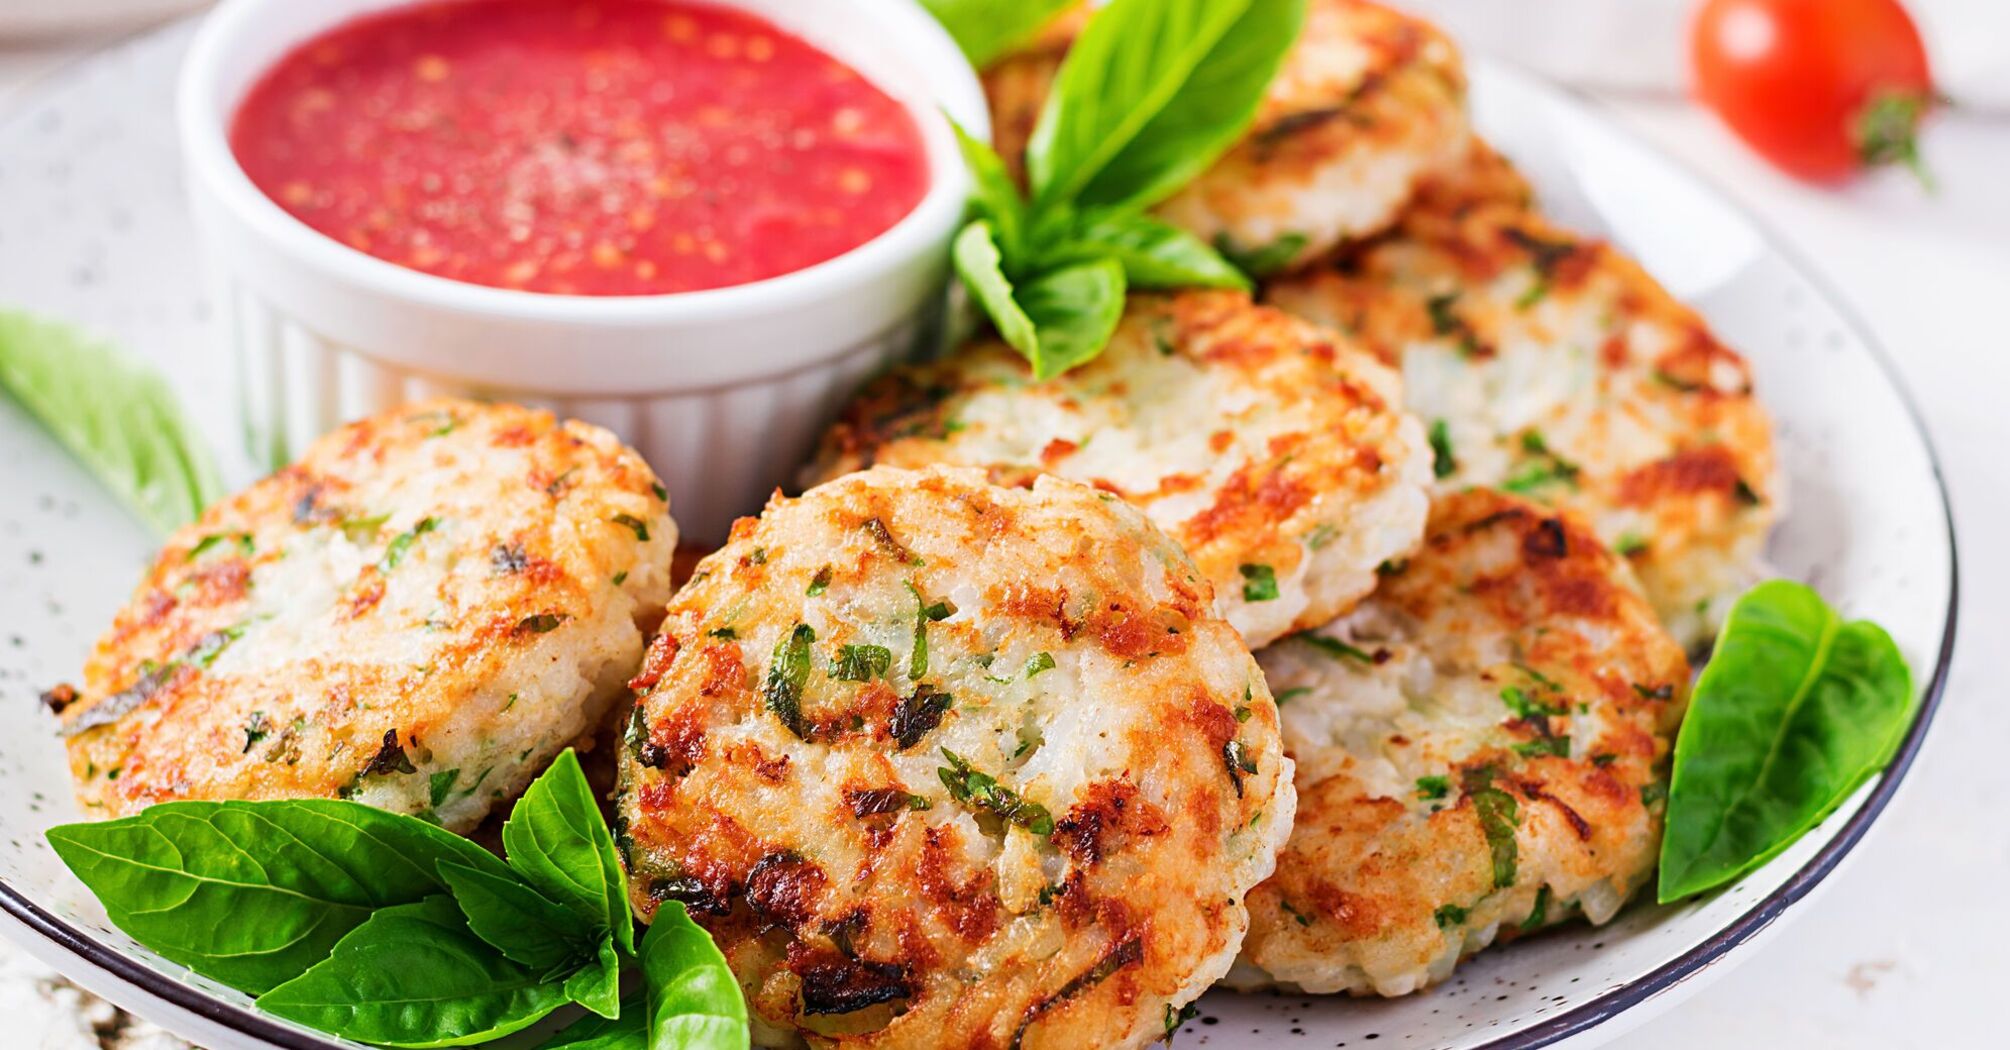 Will not fall apart: juicy chopped chicken cutlets with vegetables